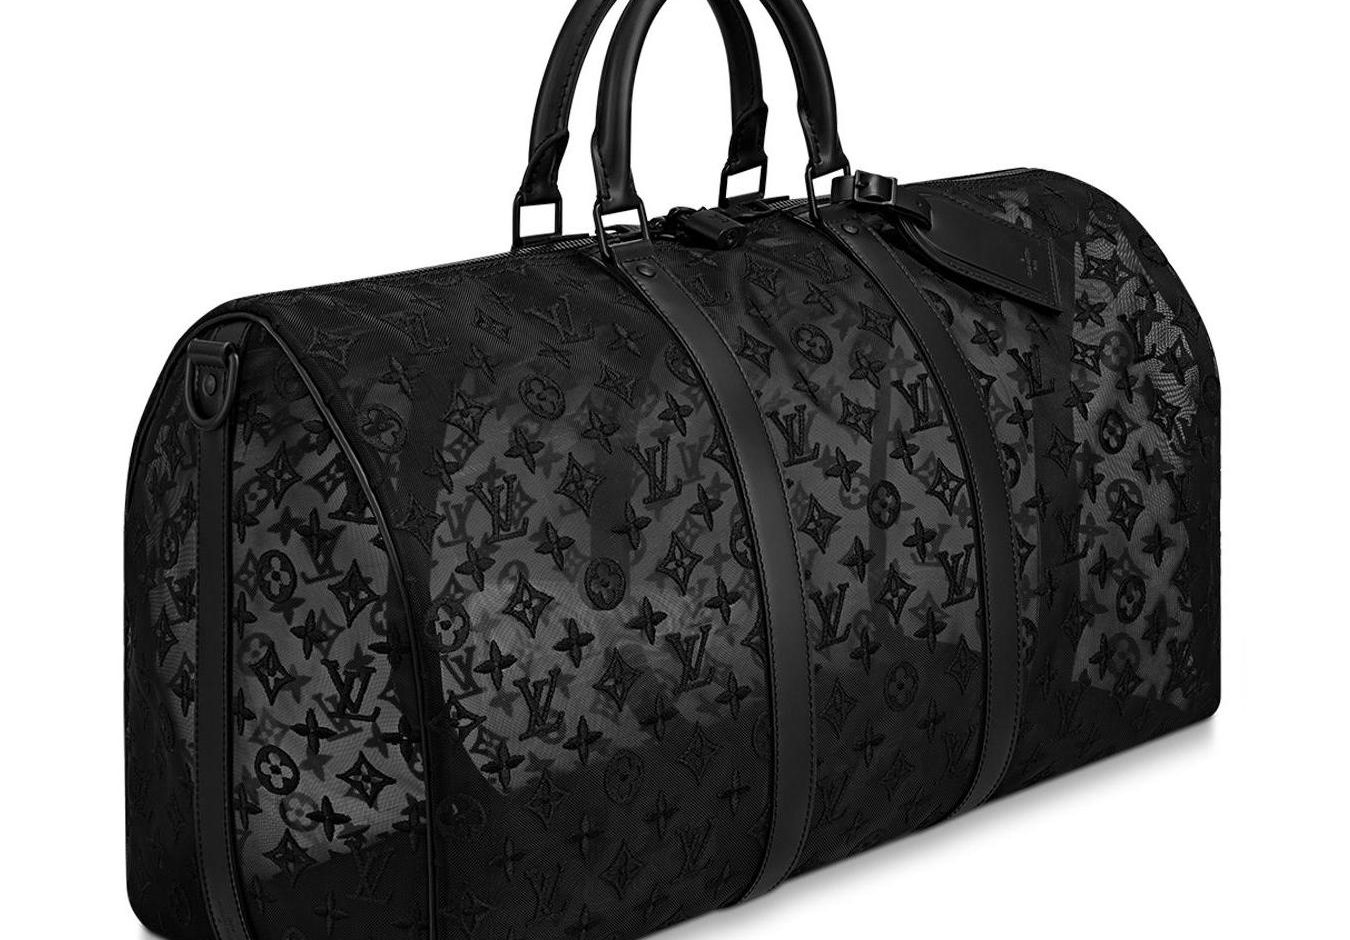 Vuitton See Through Keepall 50 Reference Guide - Spotted Fashion